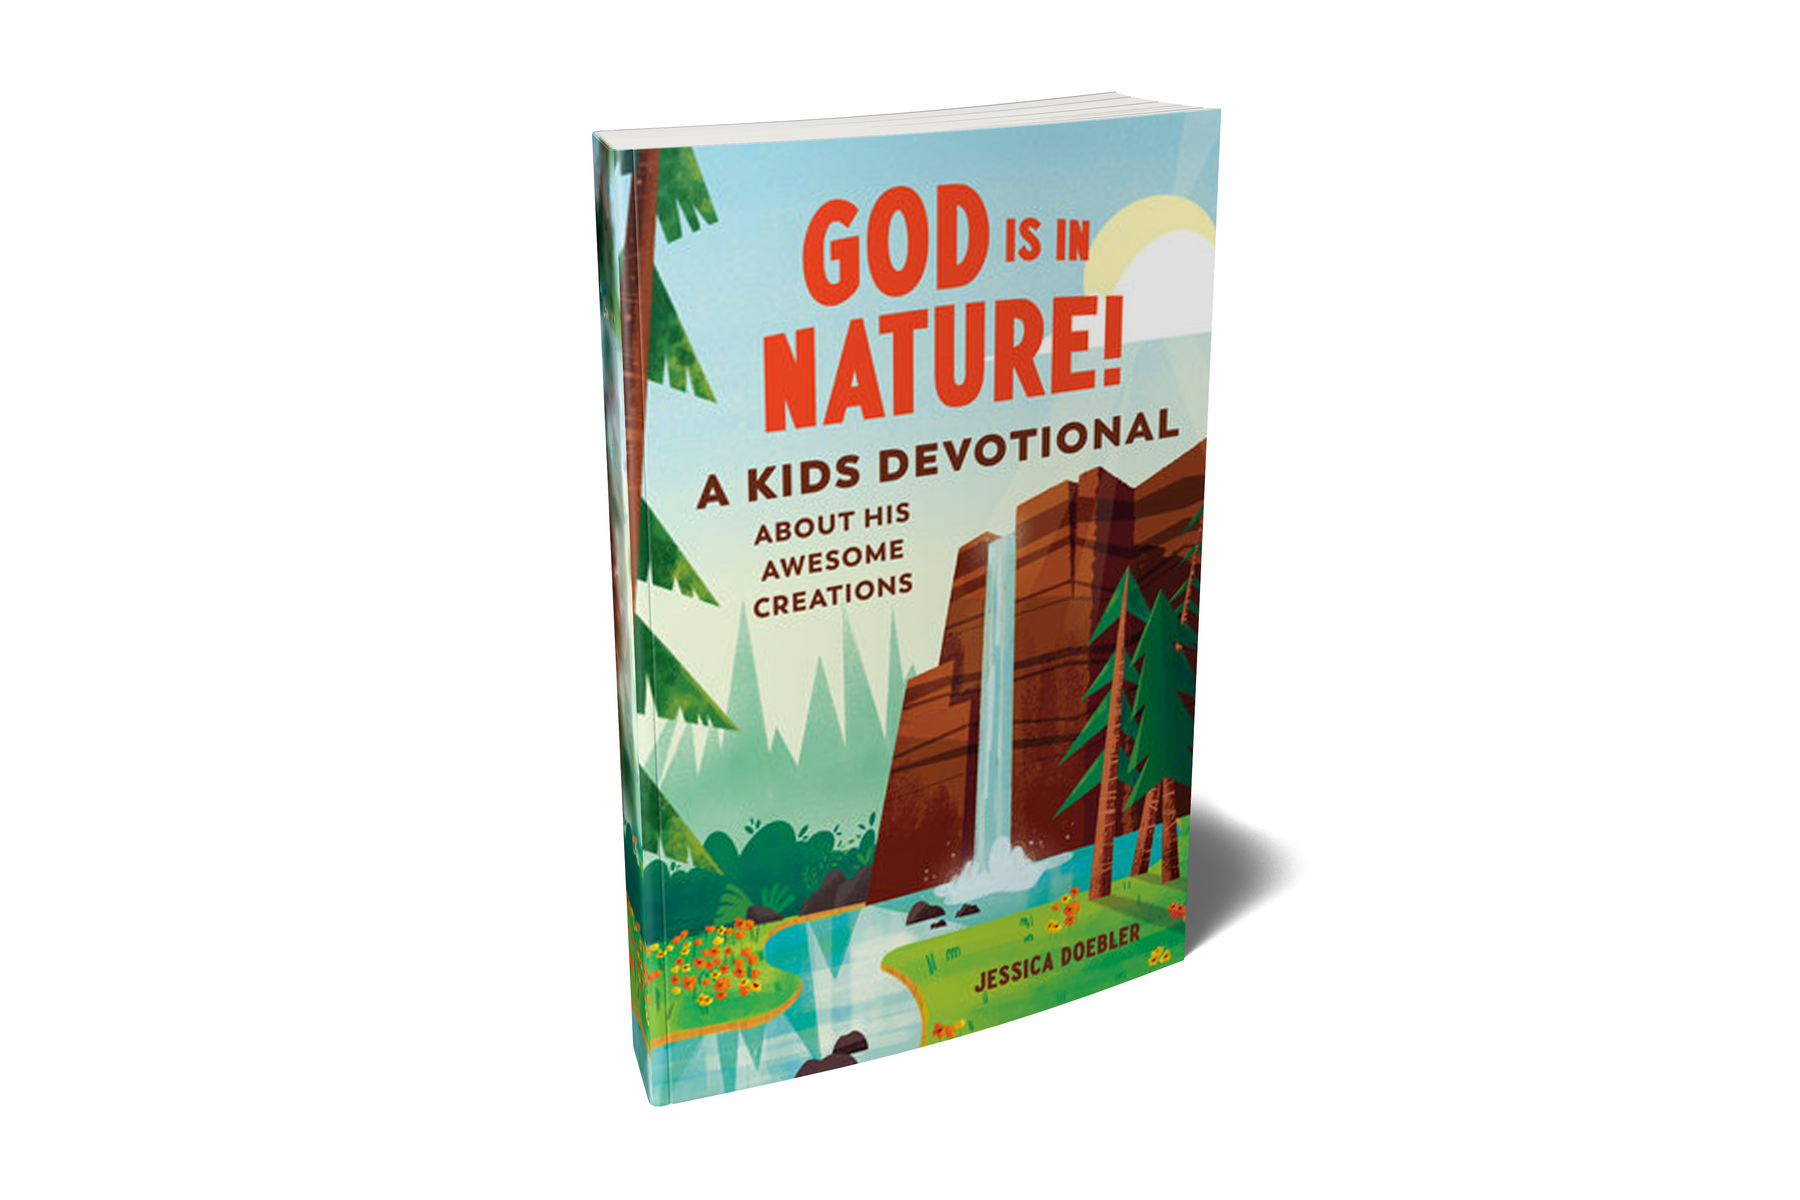 God Is in Nature! A Kids Devotional about His Awesome Creations by Jessica Doebler